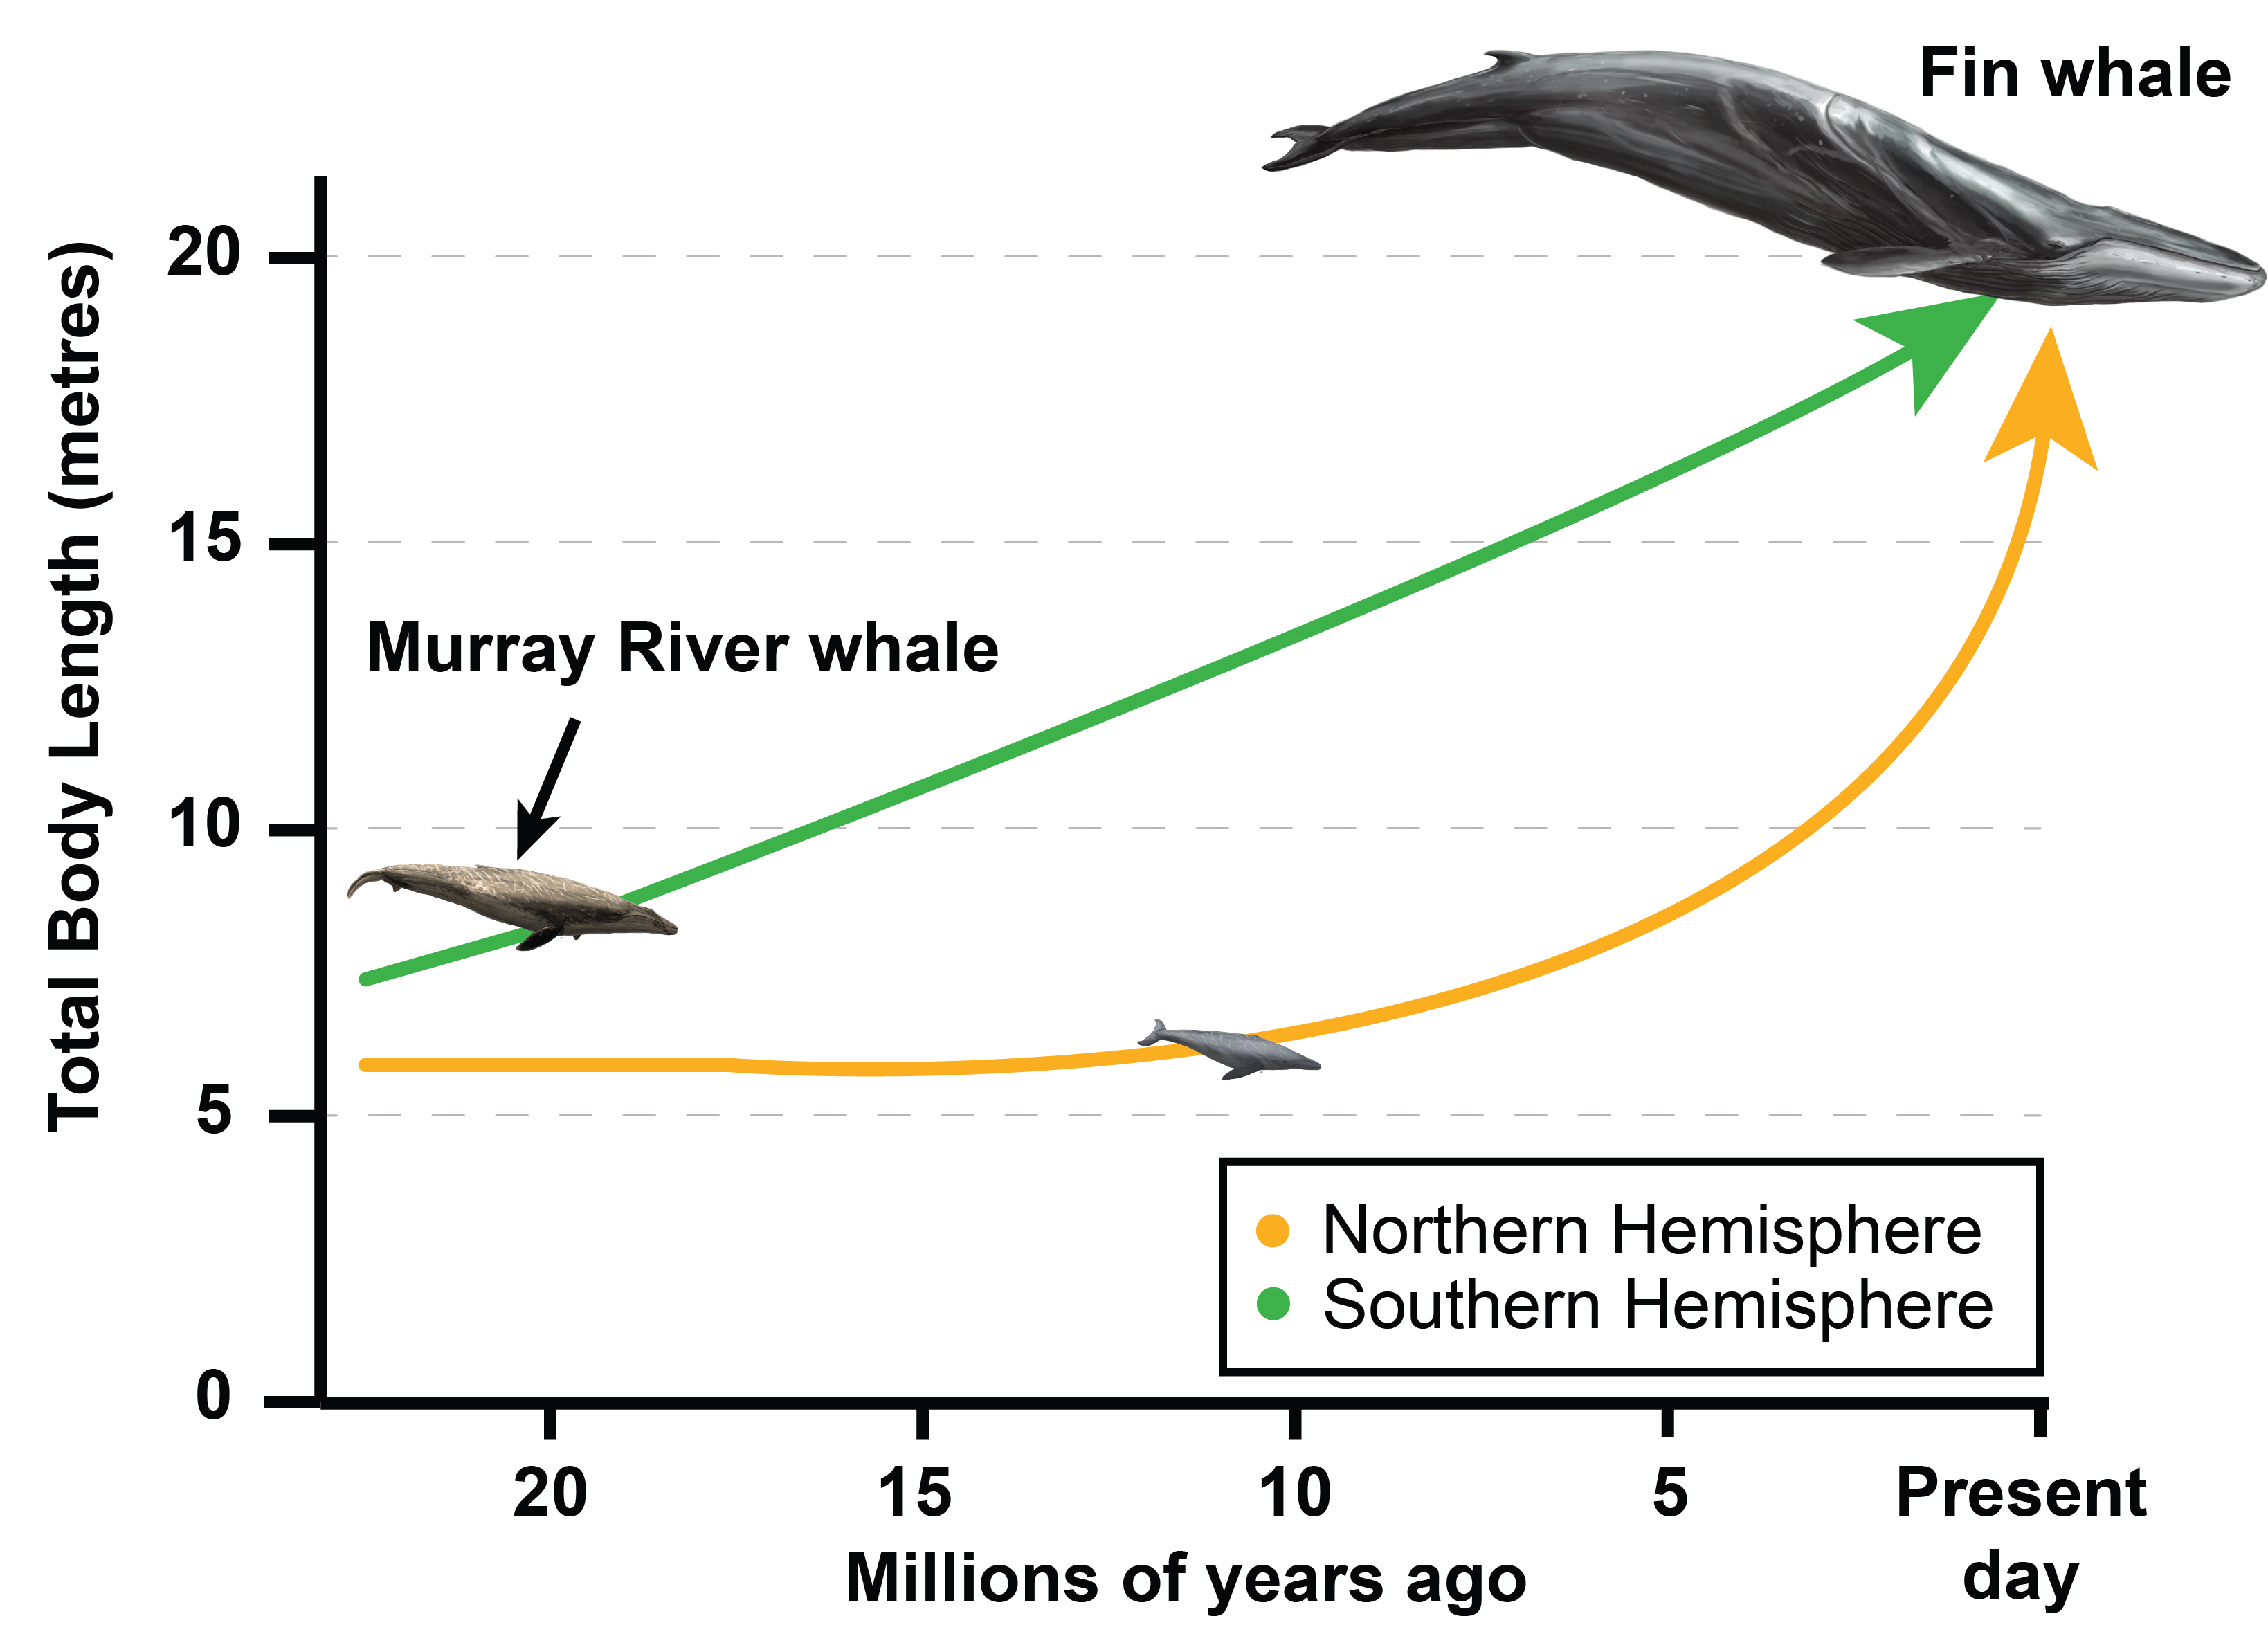 Northern Hemisphere whales are thought to have experienced long periods of size stabilization, followed by rapid growth.This most likely occurs when whales in the Southern Hemisphere cross the equator